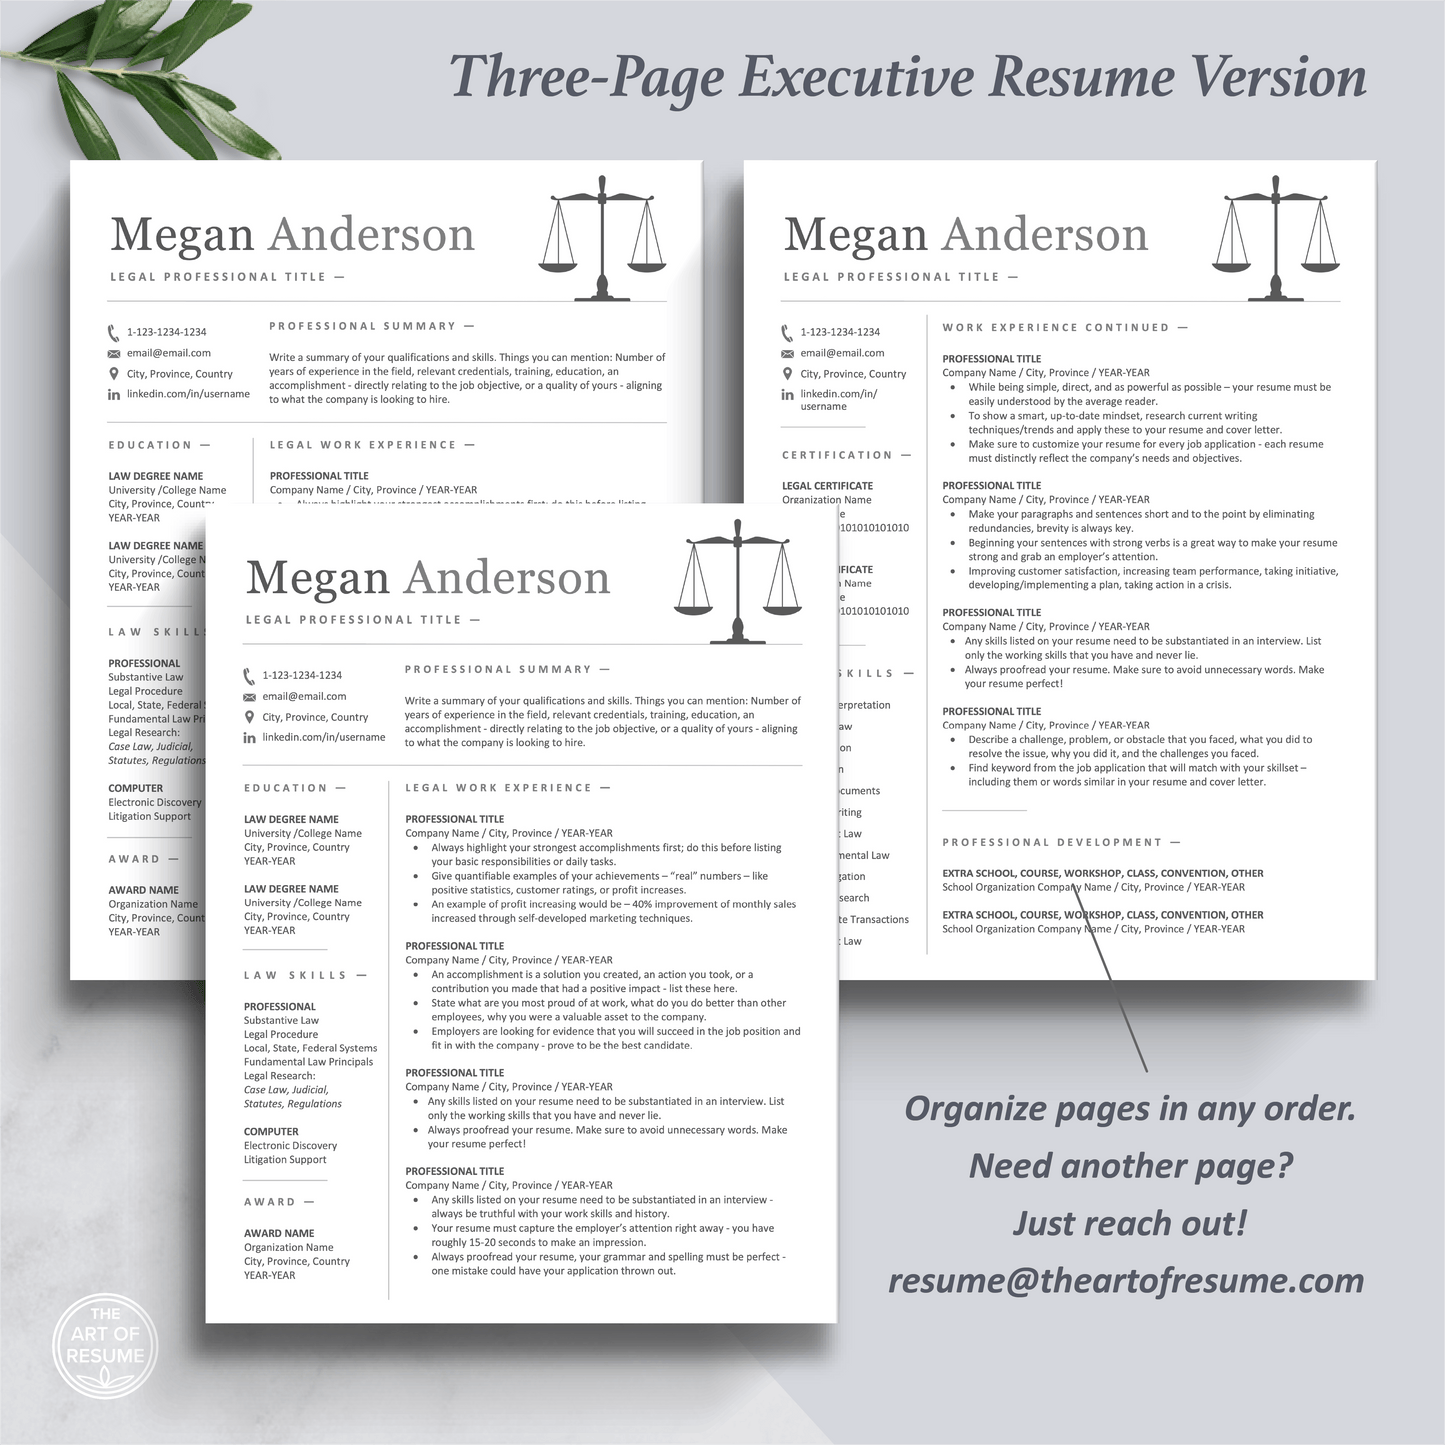 The Art of Resume Templates | Three-Page Professional Legal Law Lawyer  Executive CEO C-Suite Level  Resume CV Template Format | Curriculum Vitae